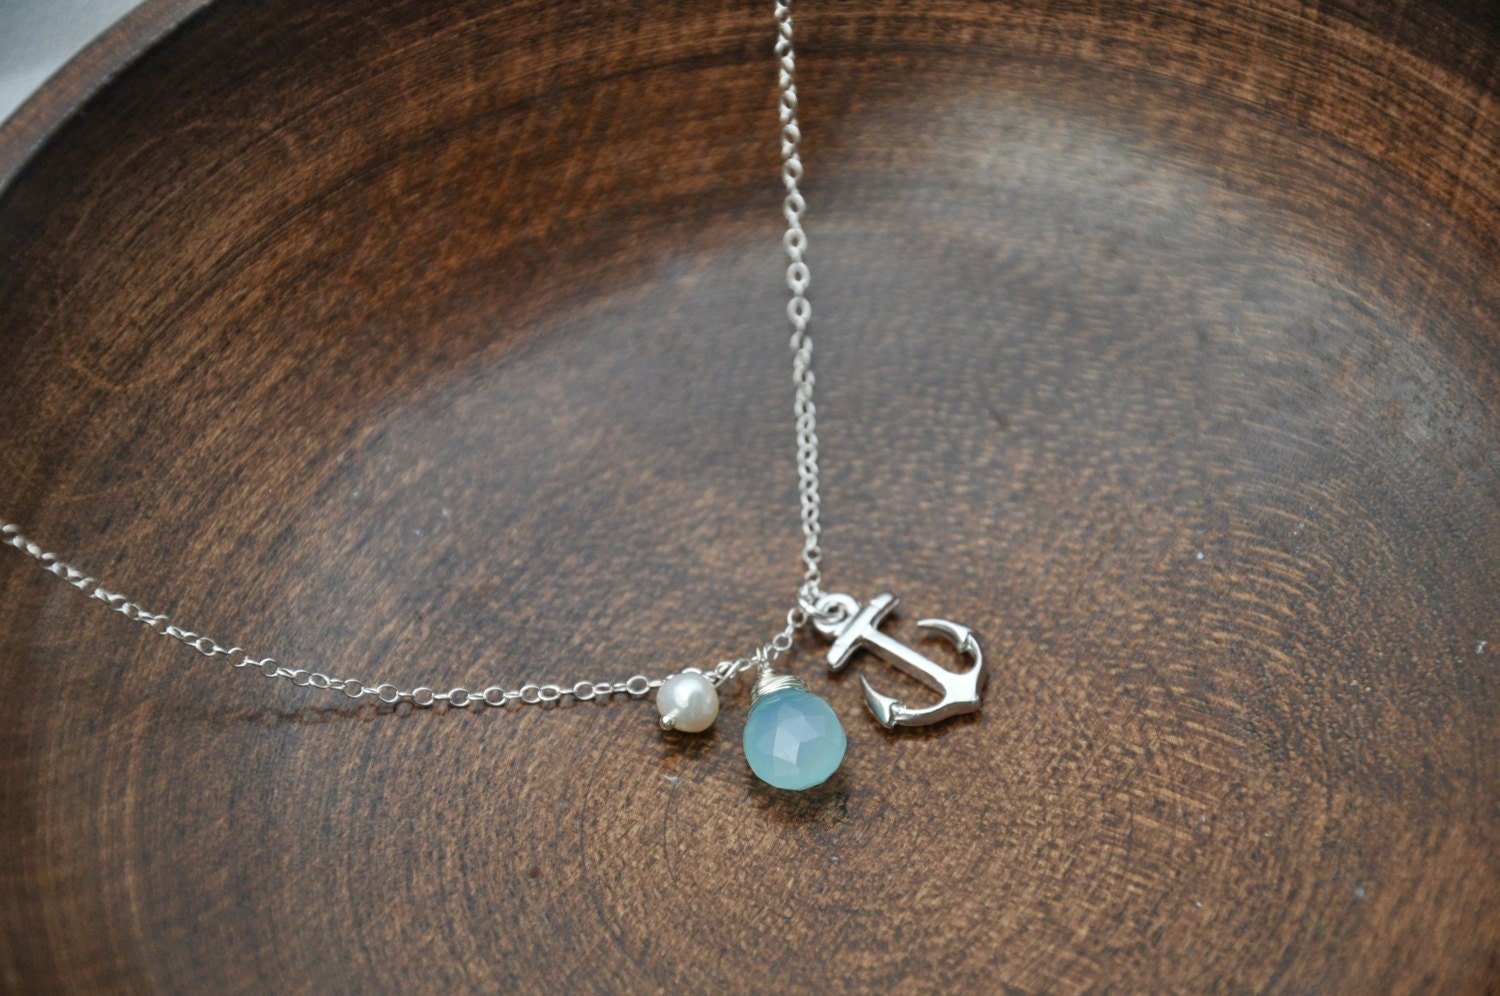 Silver Anchor Charm Necklace-  Anchor Necklace, Silver Necklace, Blue Gemstone Necklace, Nautical Theme, Dainty Necklace, Delicate Jewelry